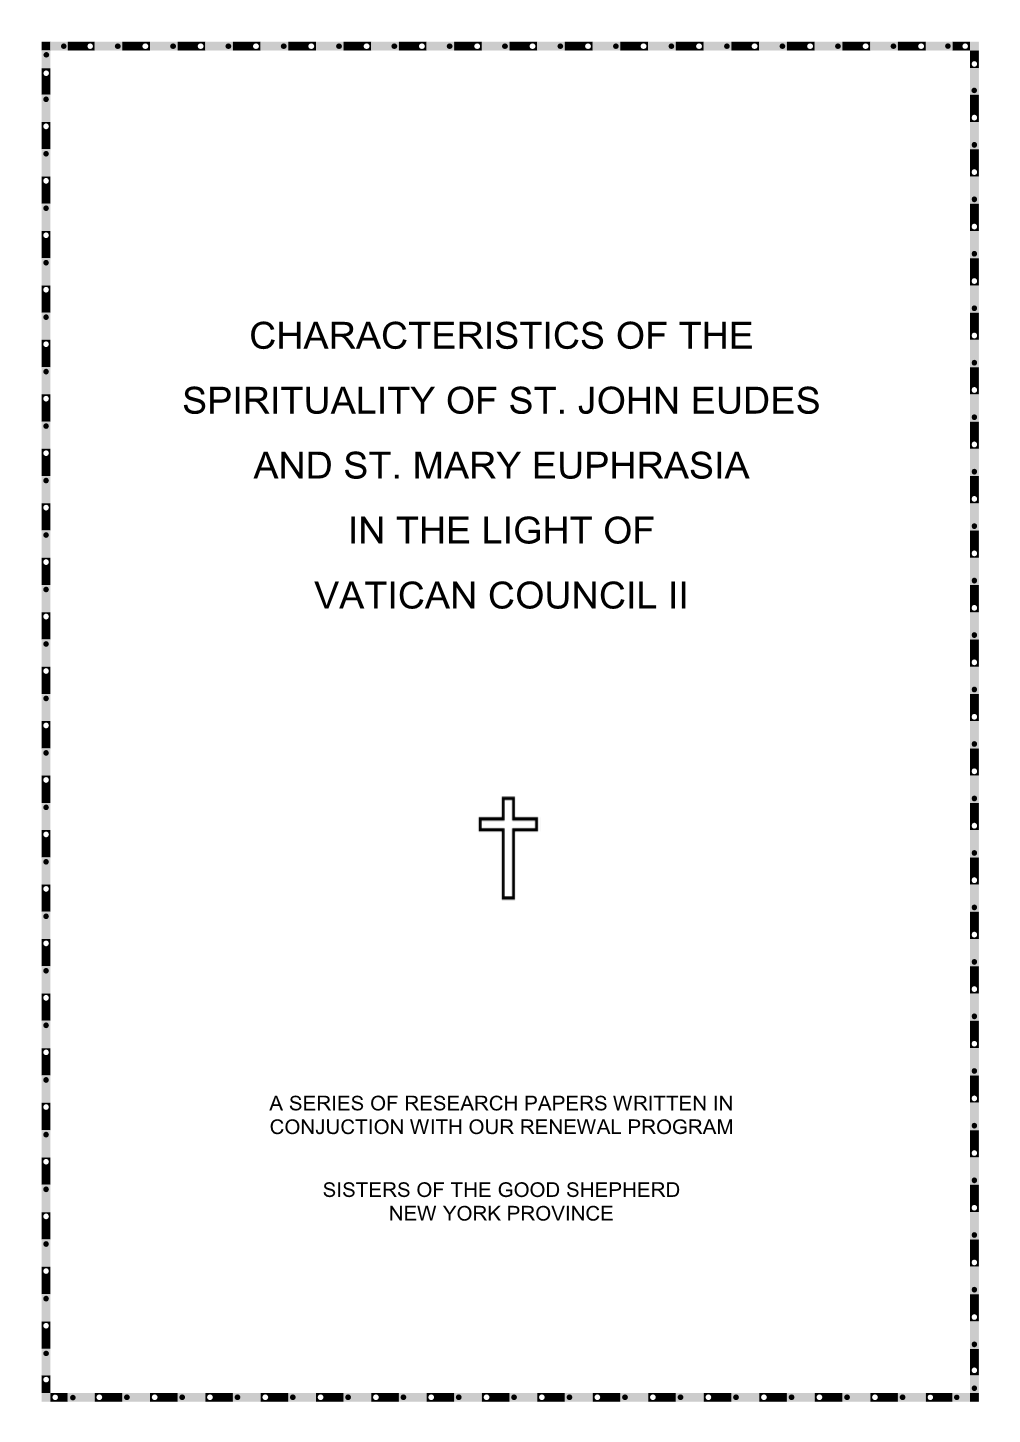 Characteristics of the Spirituality of St. John Eudes and St